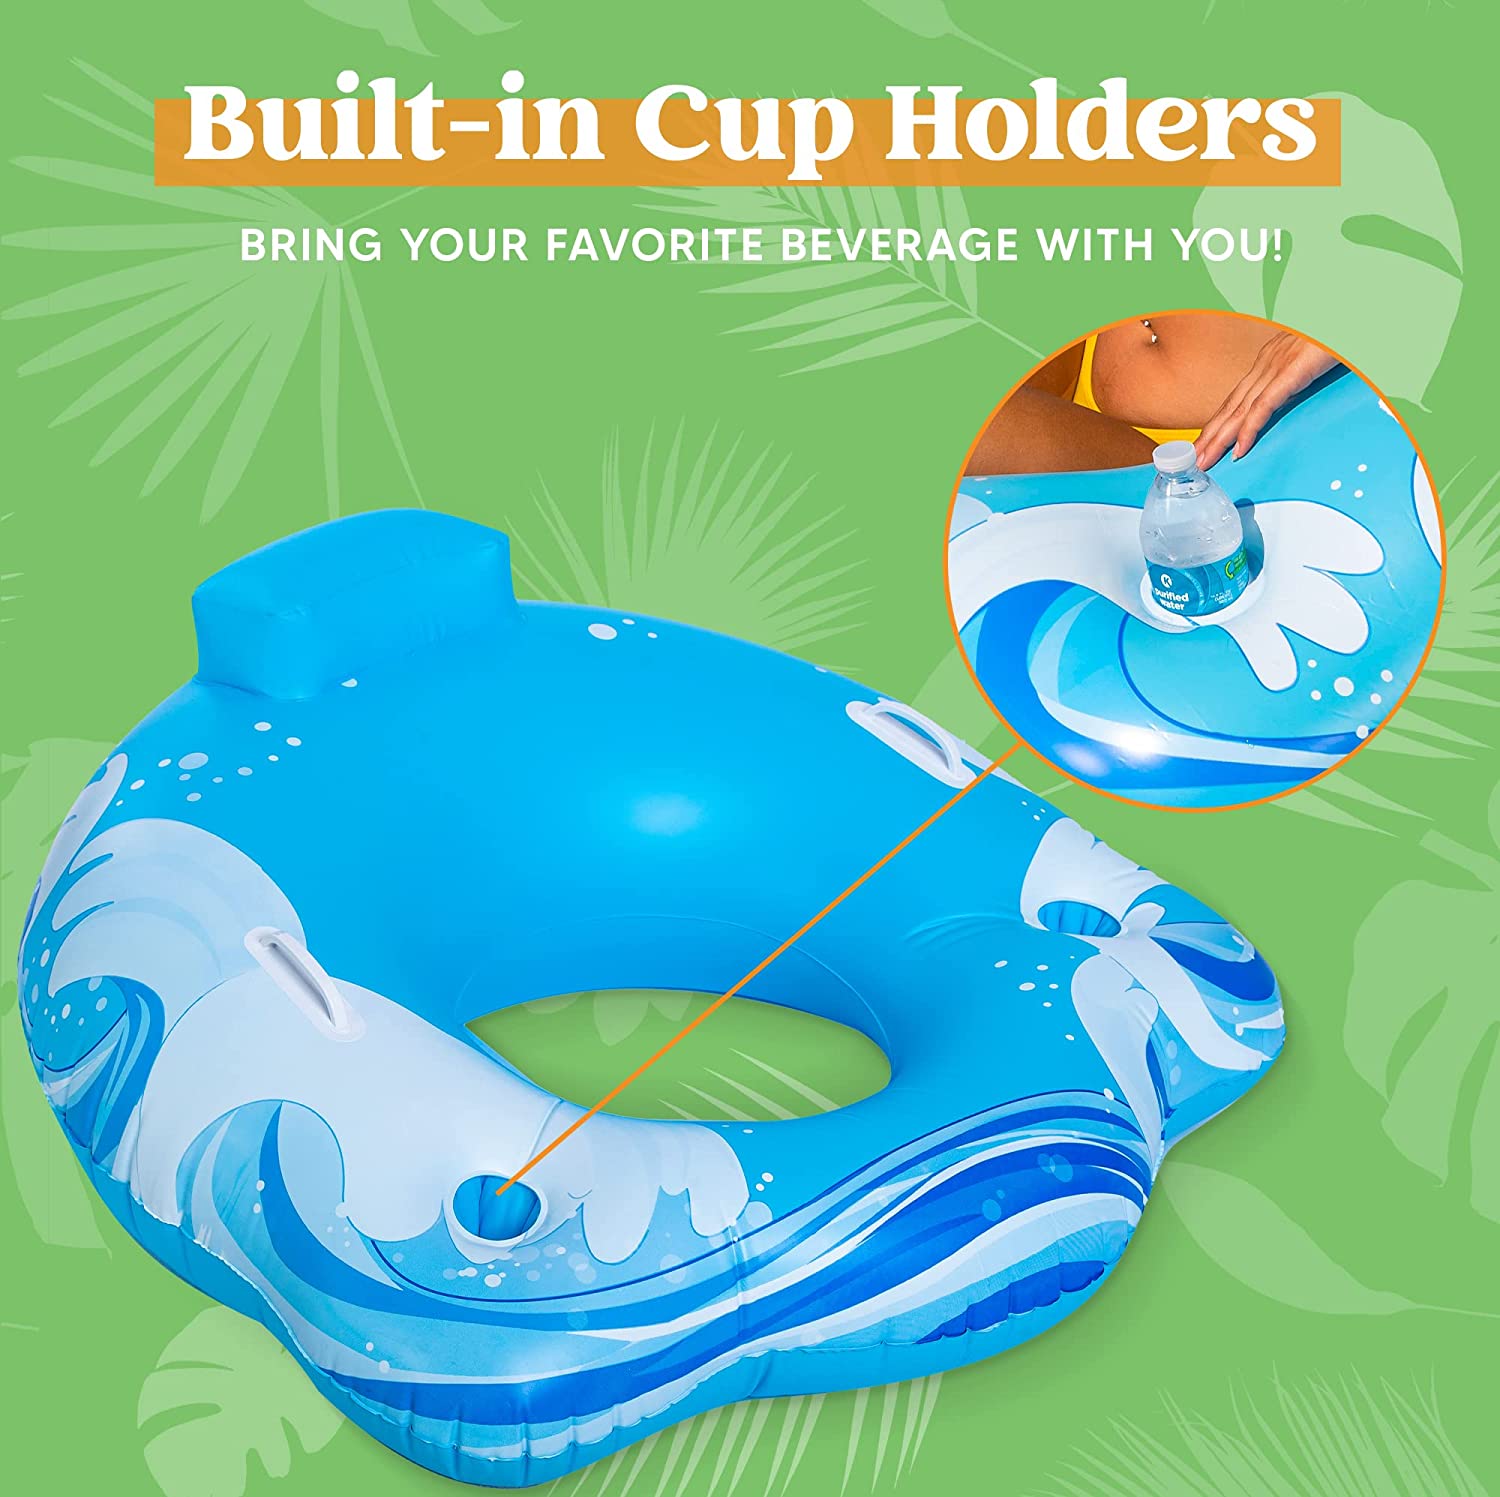 JOYIN Inflatable Pool Lounger, Pool Float for Swimming Pool Party Decorations, Inflated Size 44 x 42